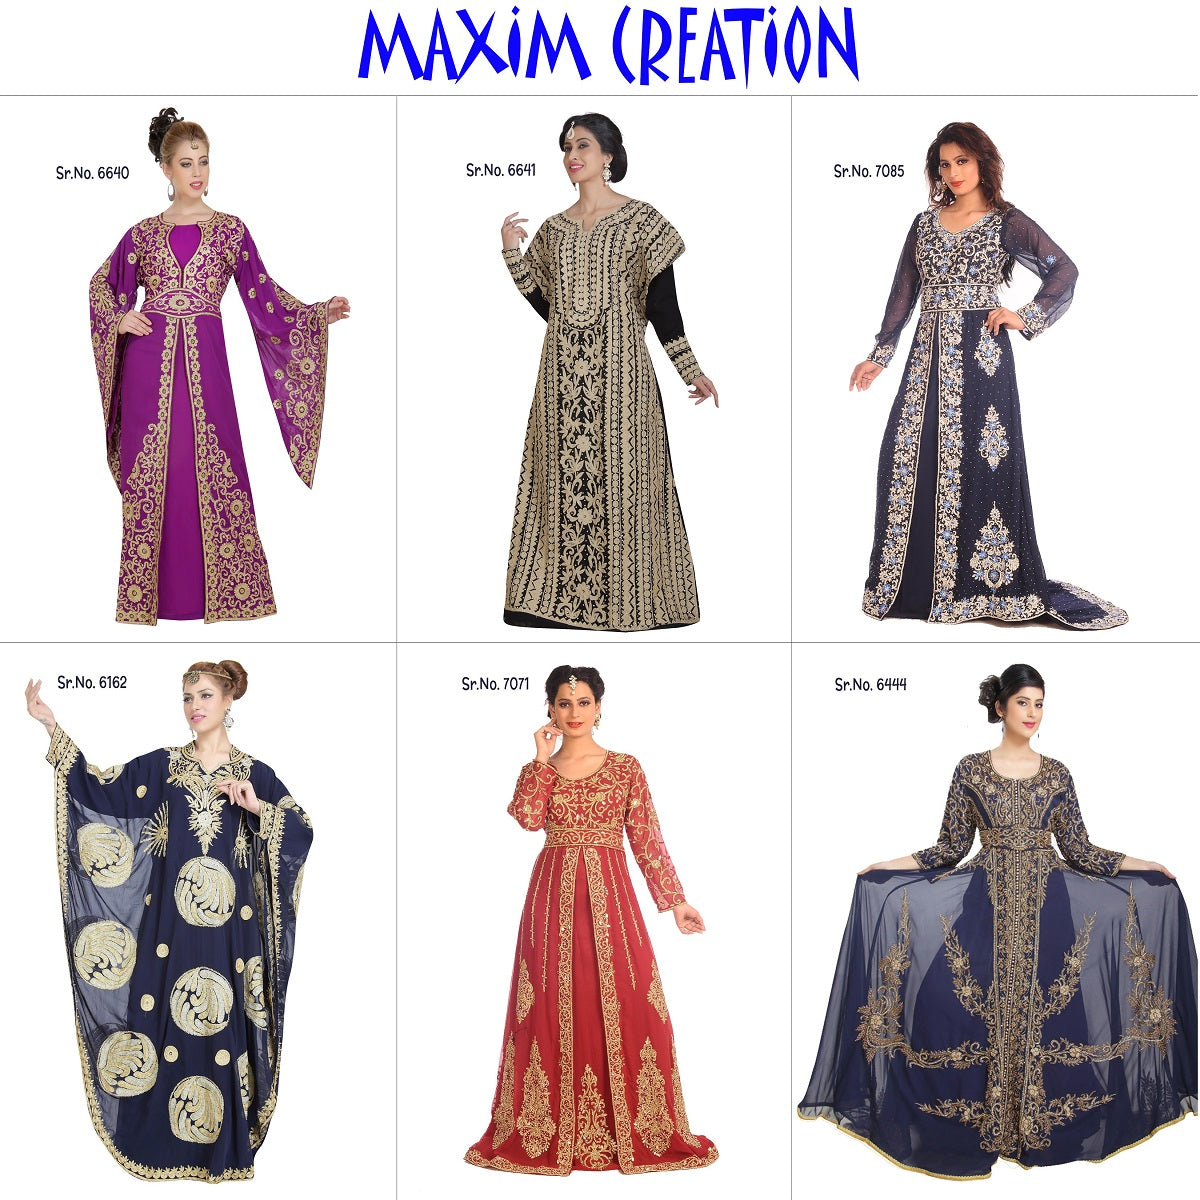 Load image into Gallery viewer, Floral Digital Printed Turkish Kaftan With Luxe Beads - Maxim Creation
